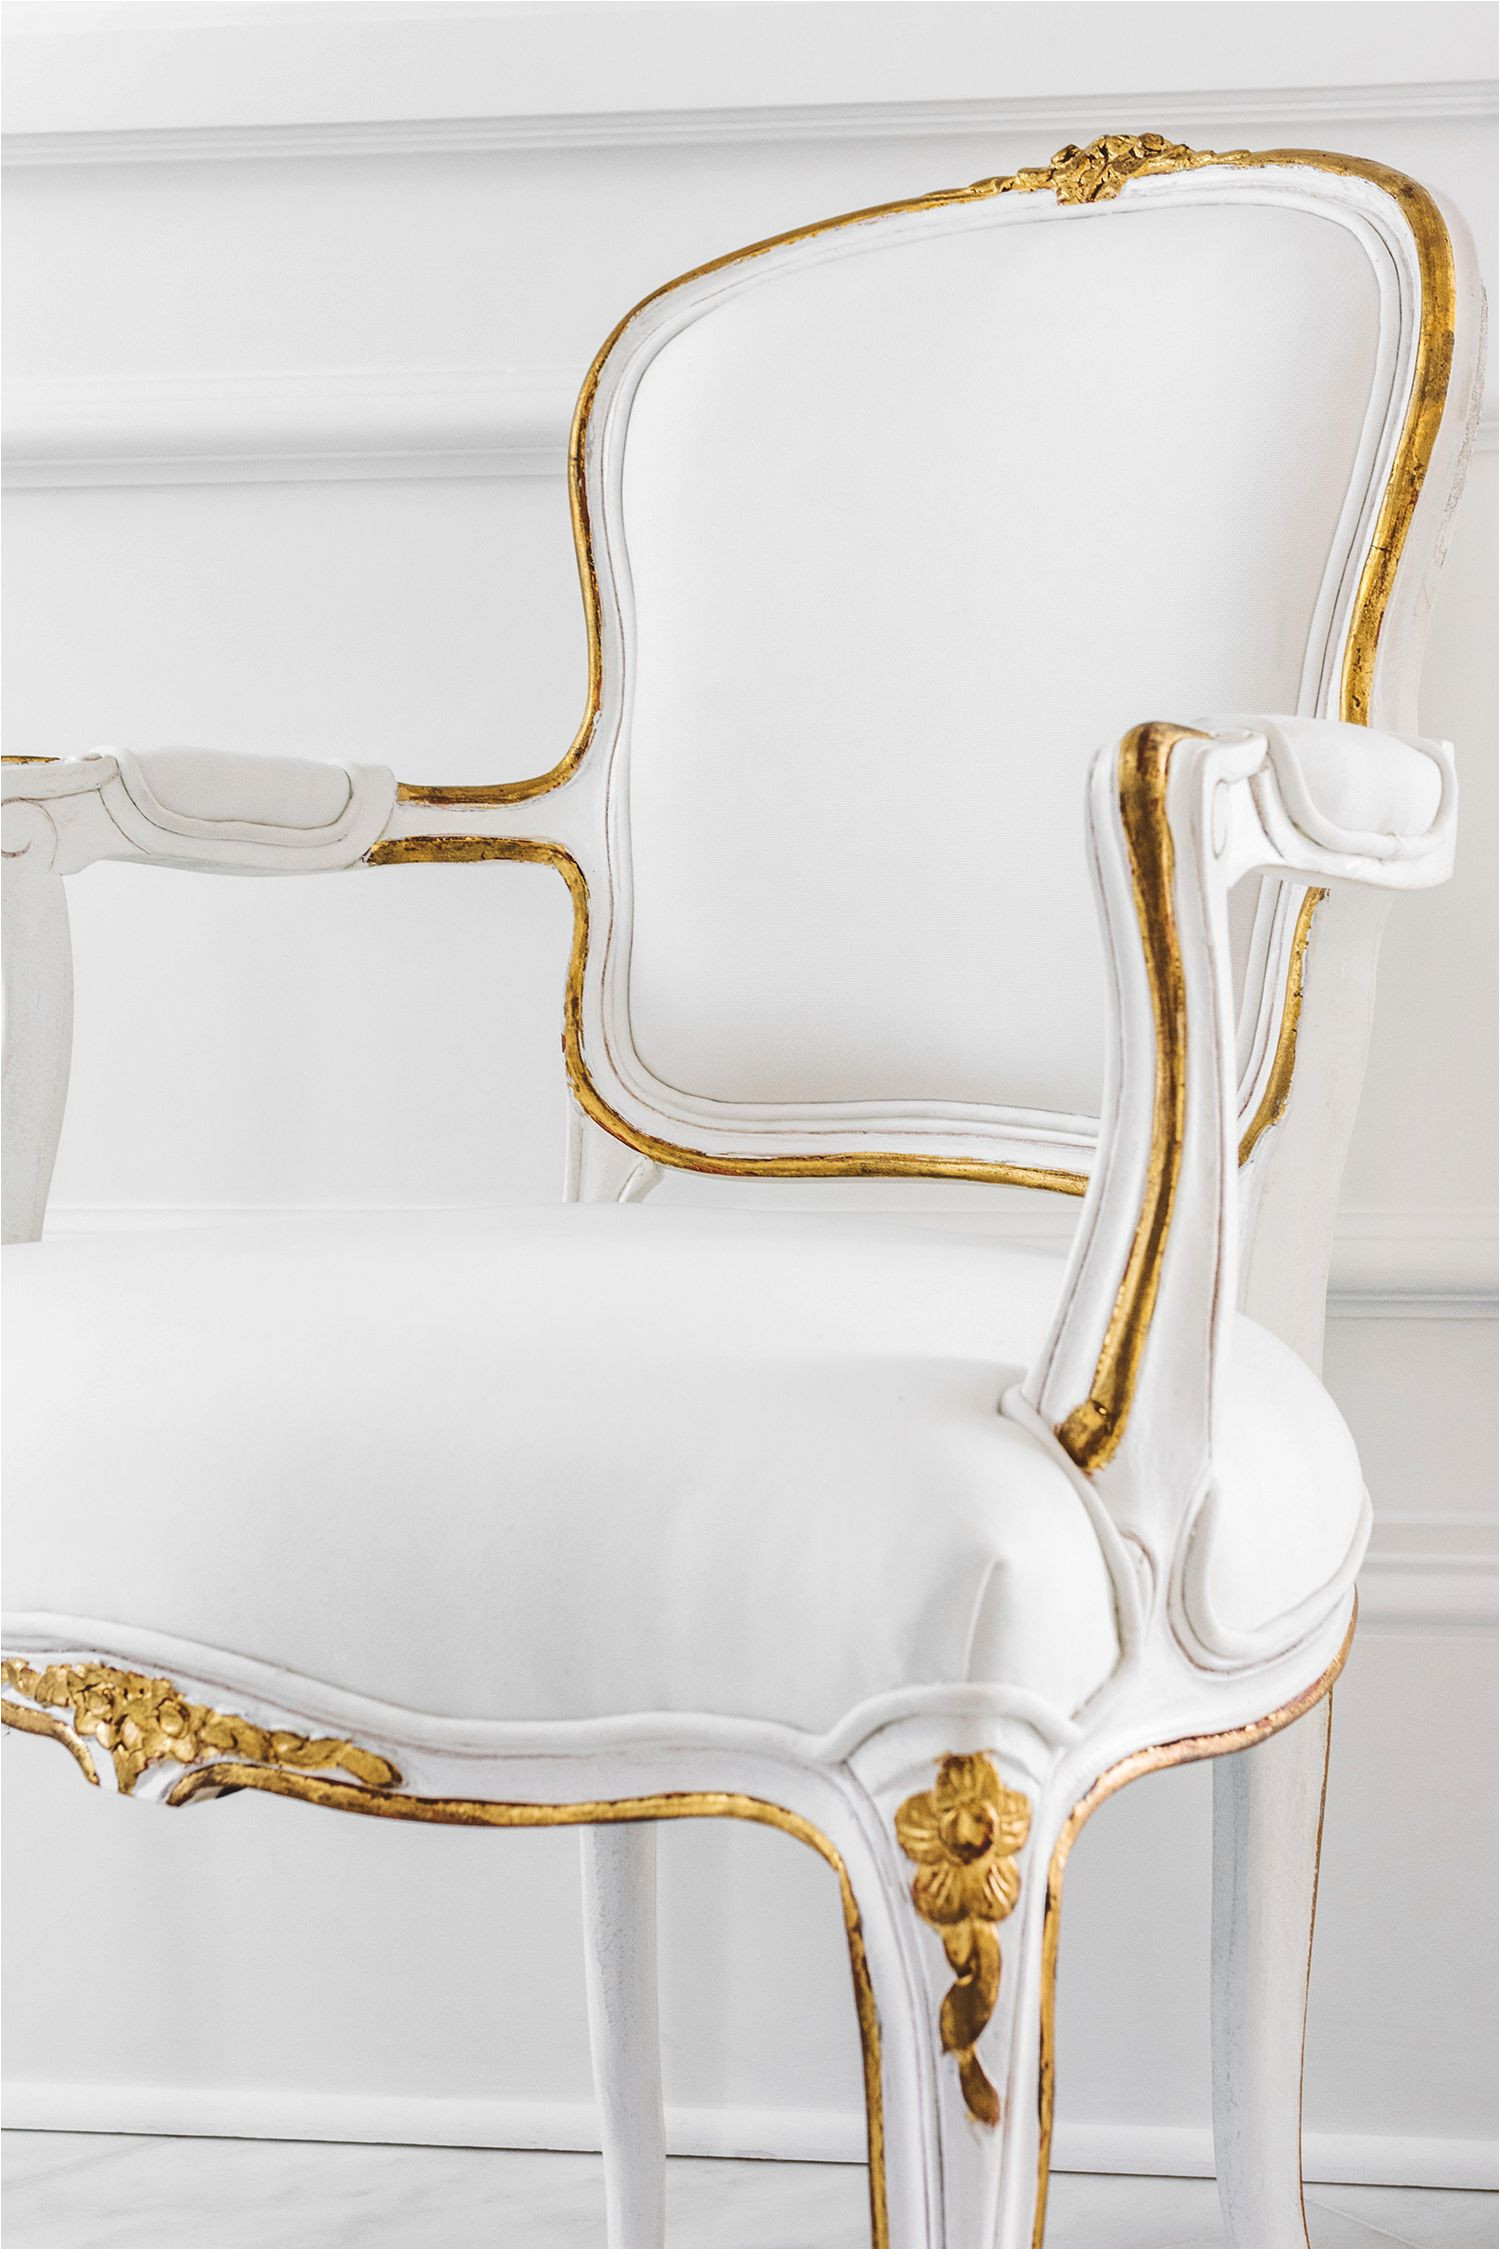 the hand crafted louis xv style regent side chair features delicate floral carvings a hand applied white finish gilded accents and white upholstery